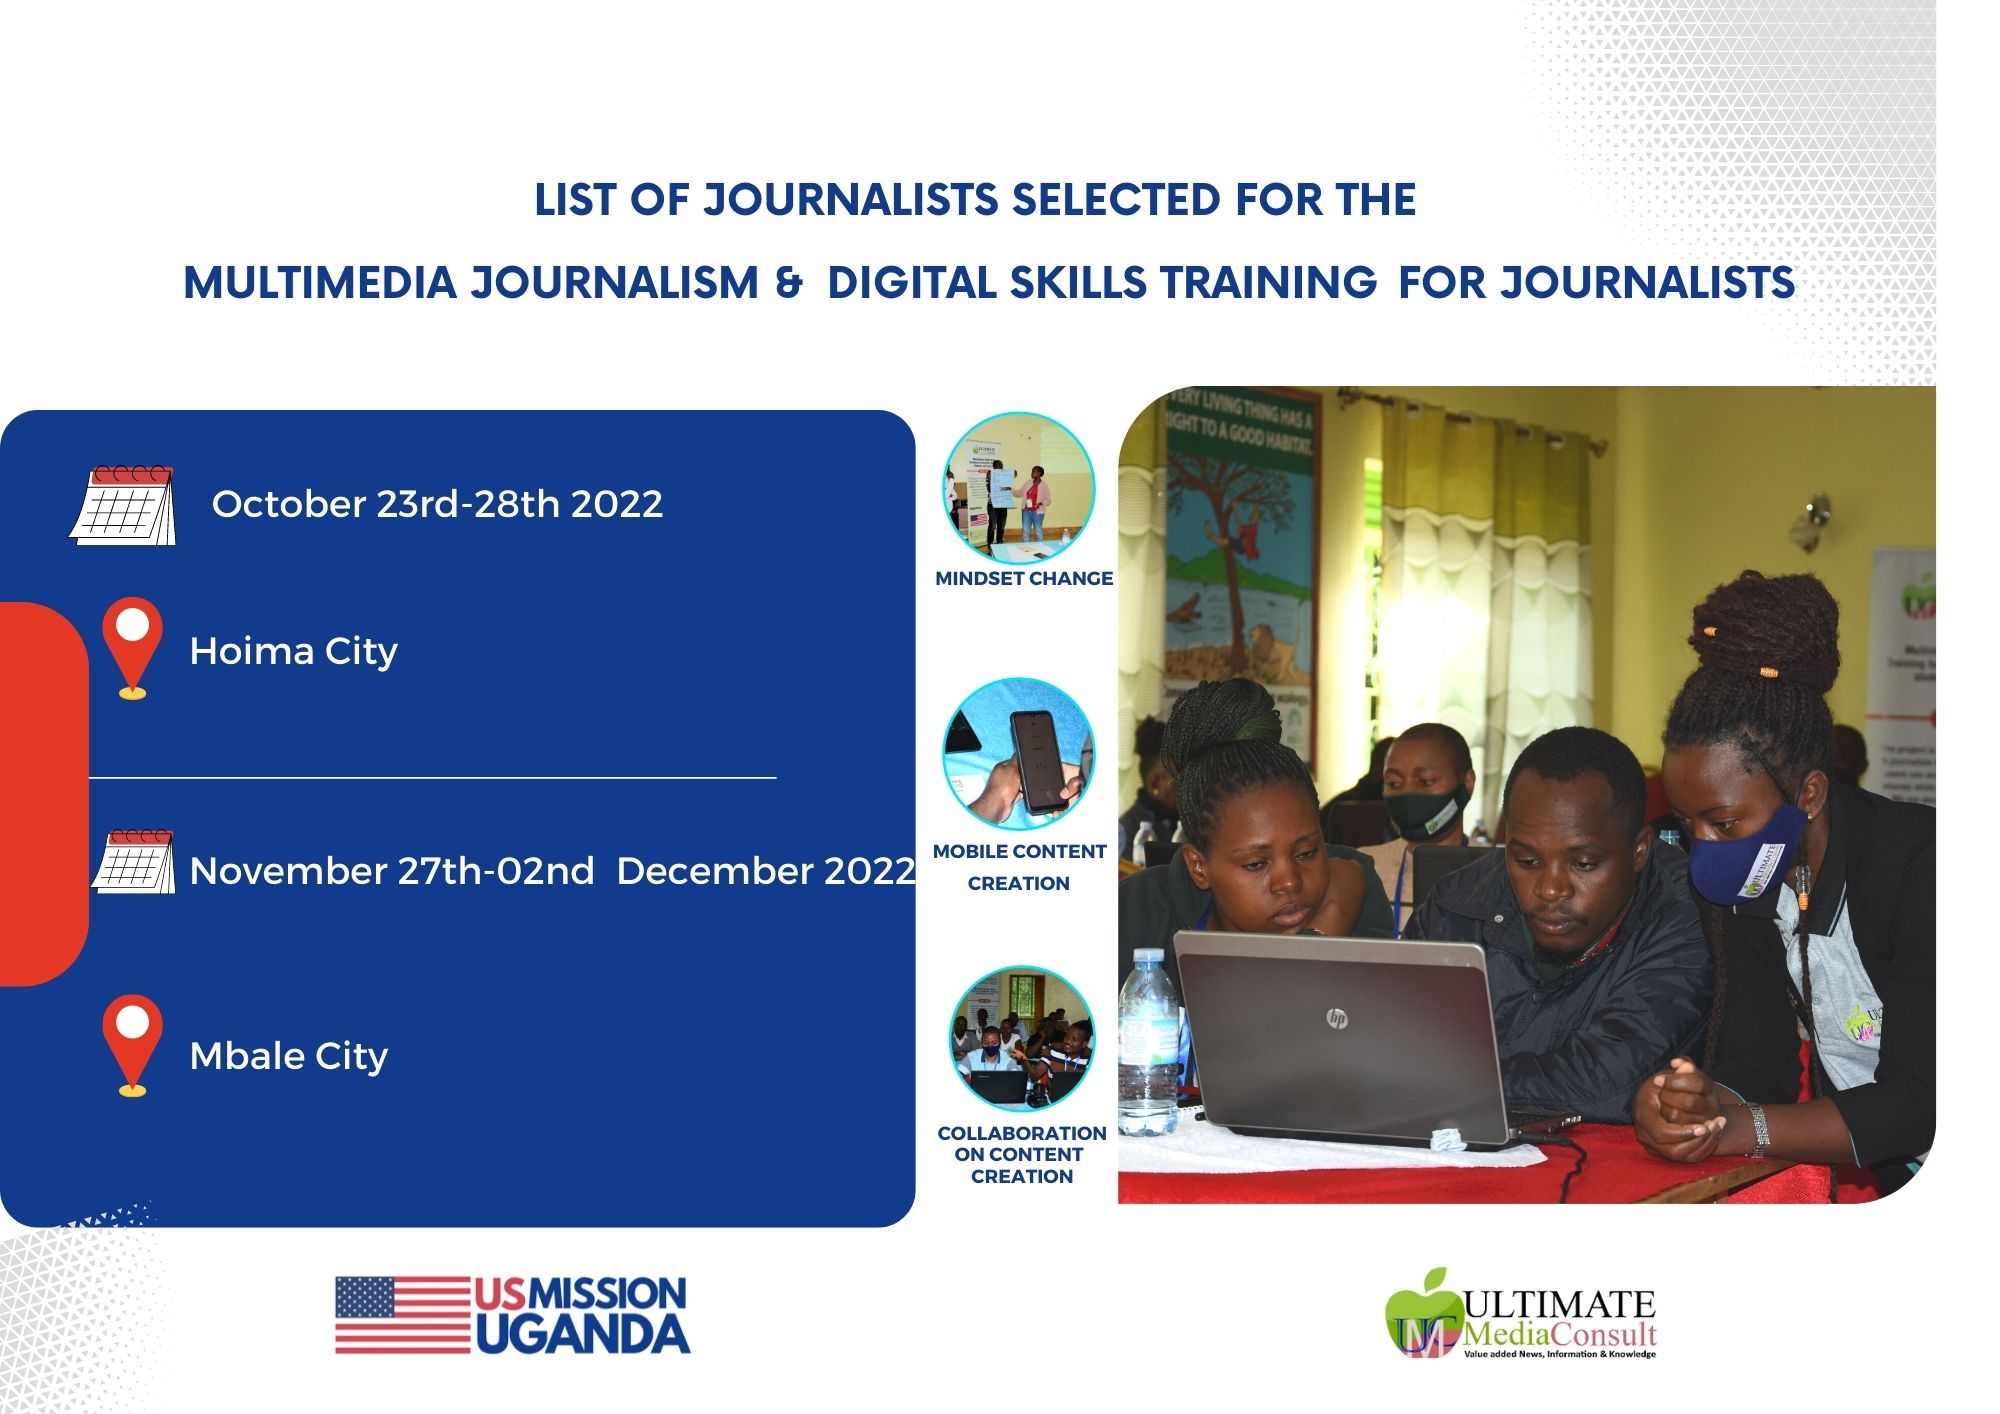 List of journalists selected for multimedia journalism and digital skills training